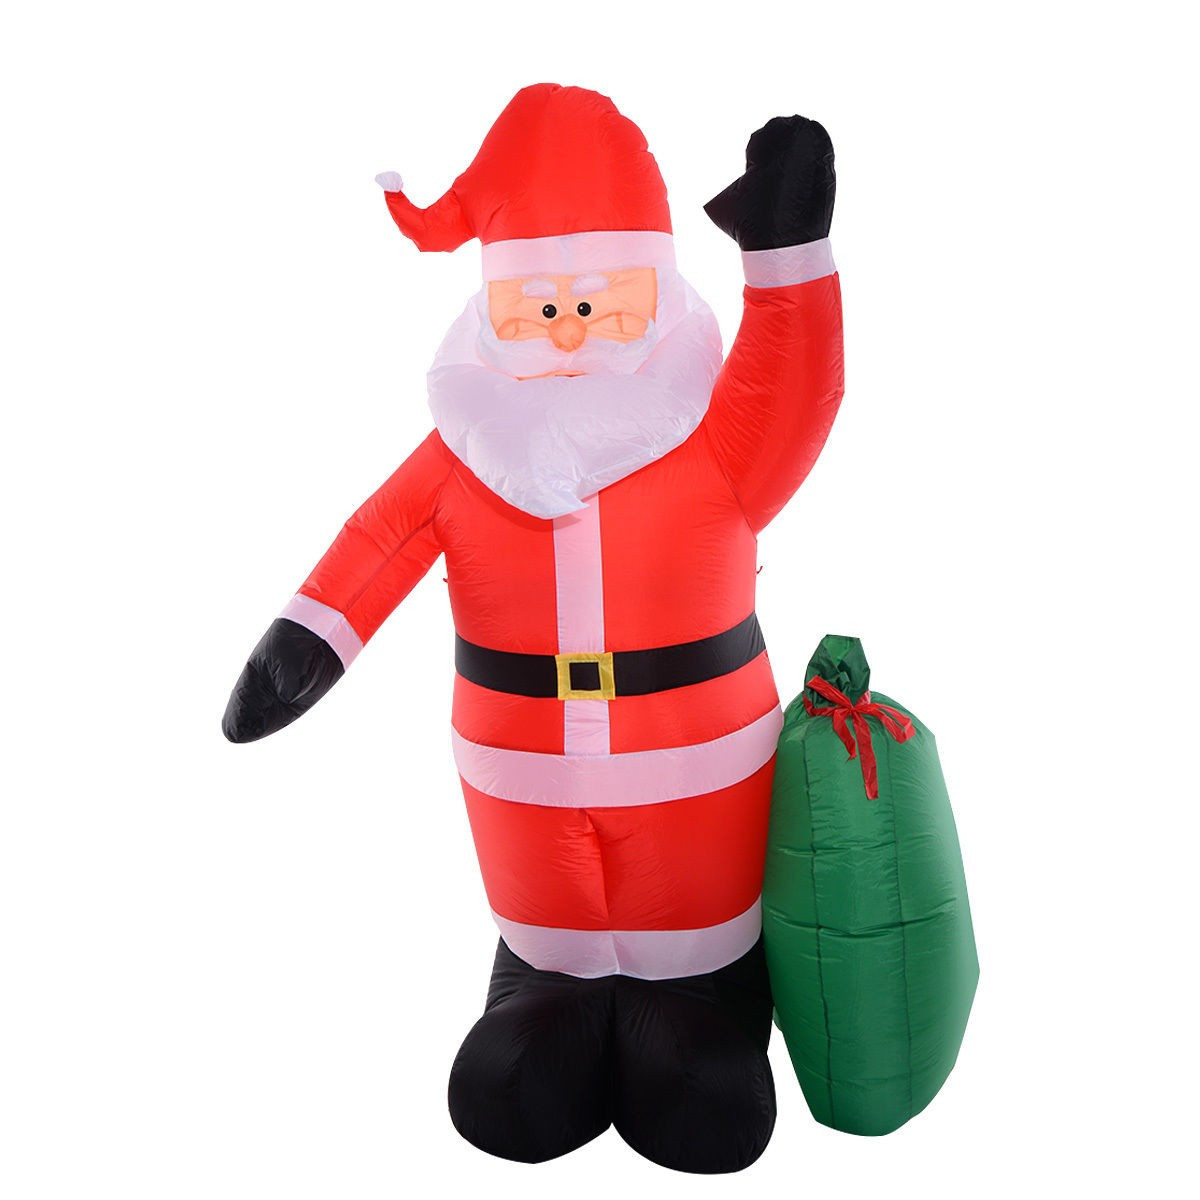 Outdoor Christmas Inflatables
 8 Ft Airblown Inflatable Christmas Santa Claus Gift Lawn